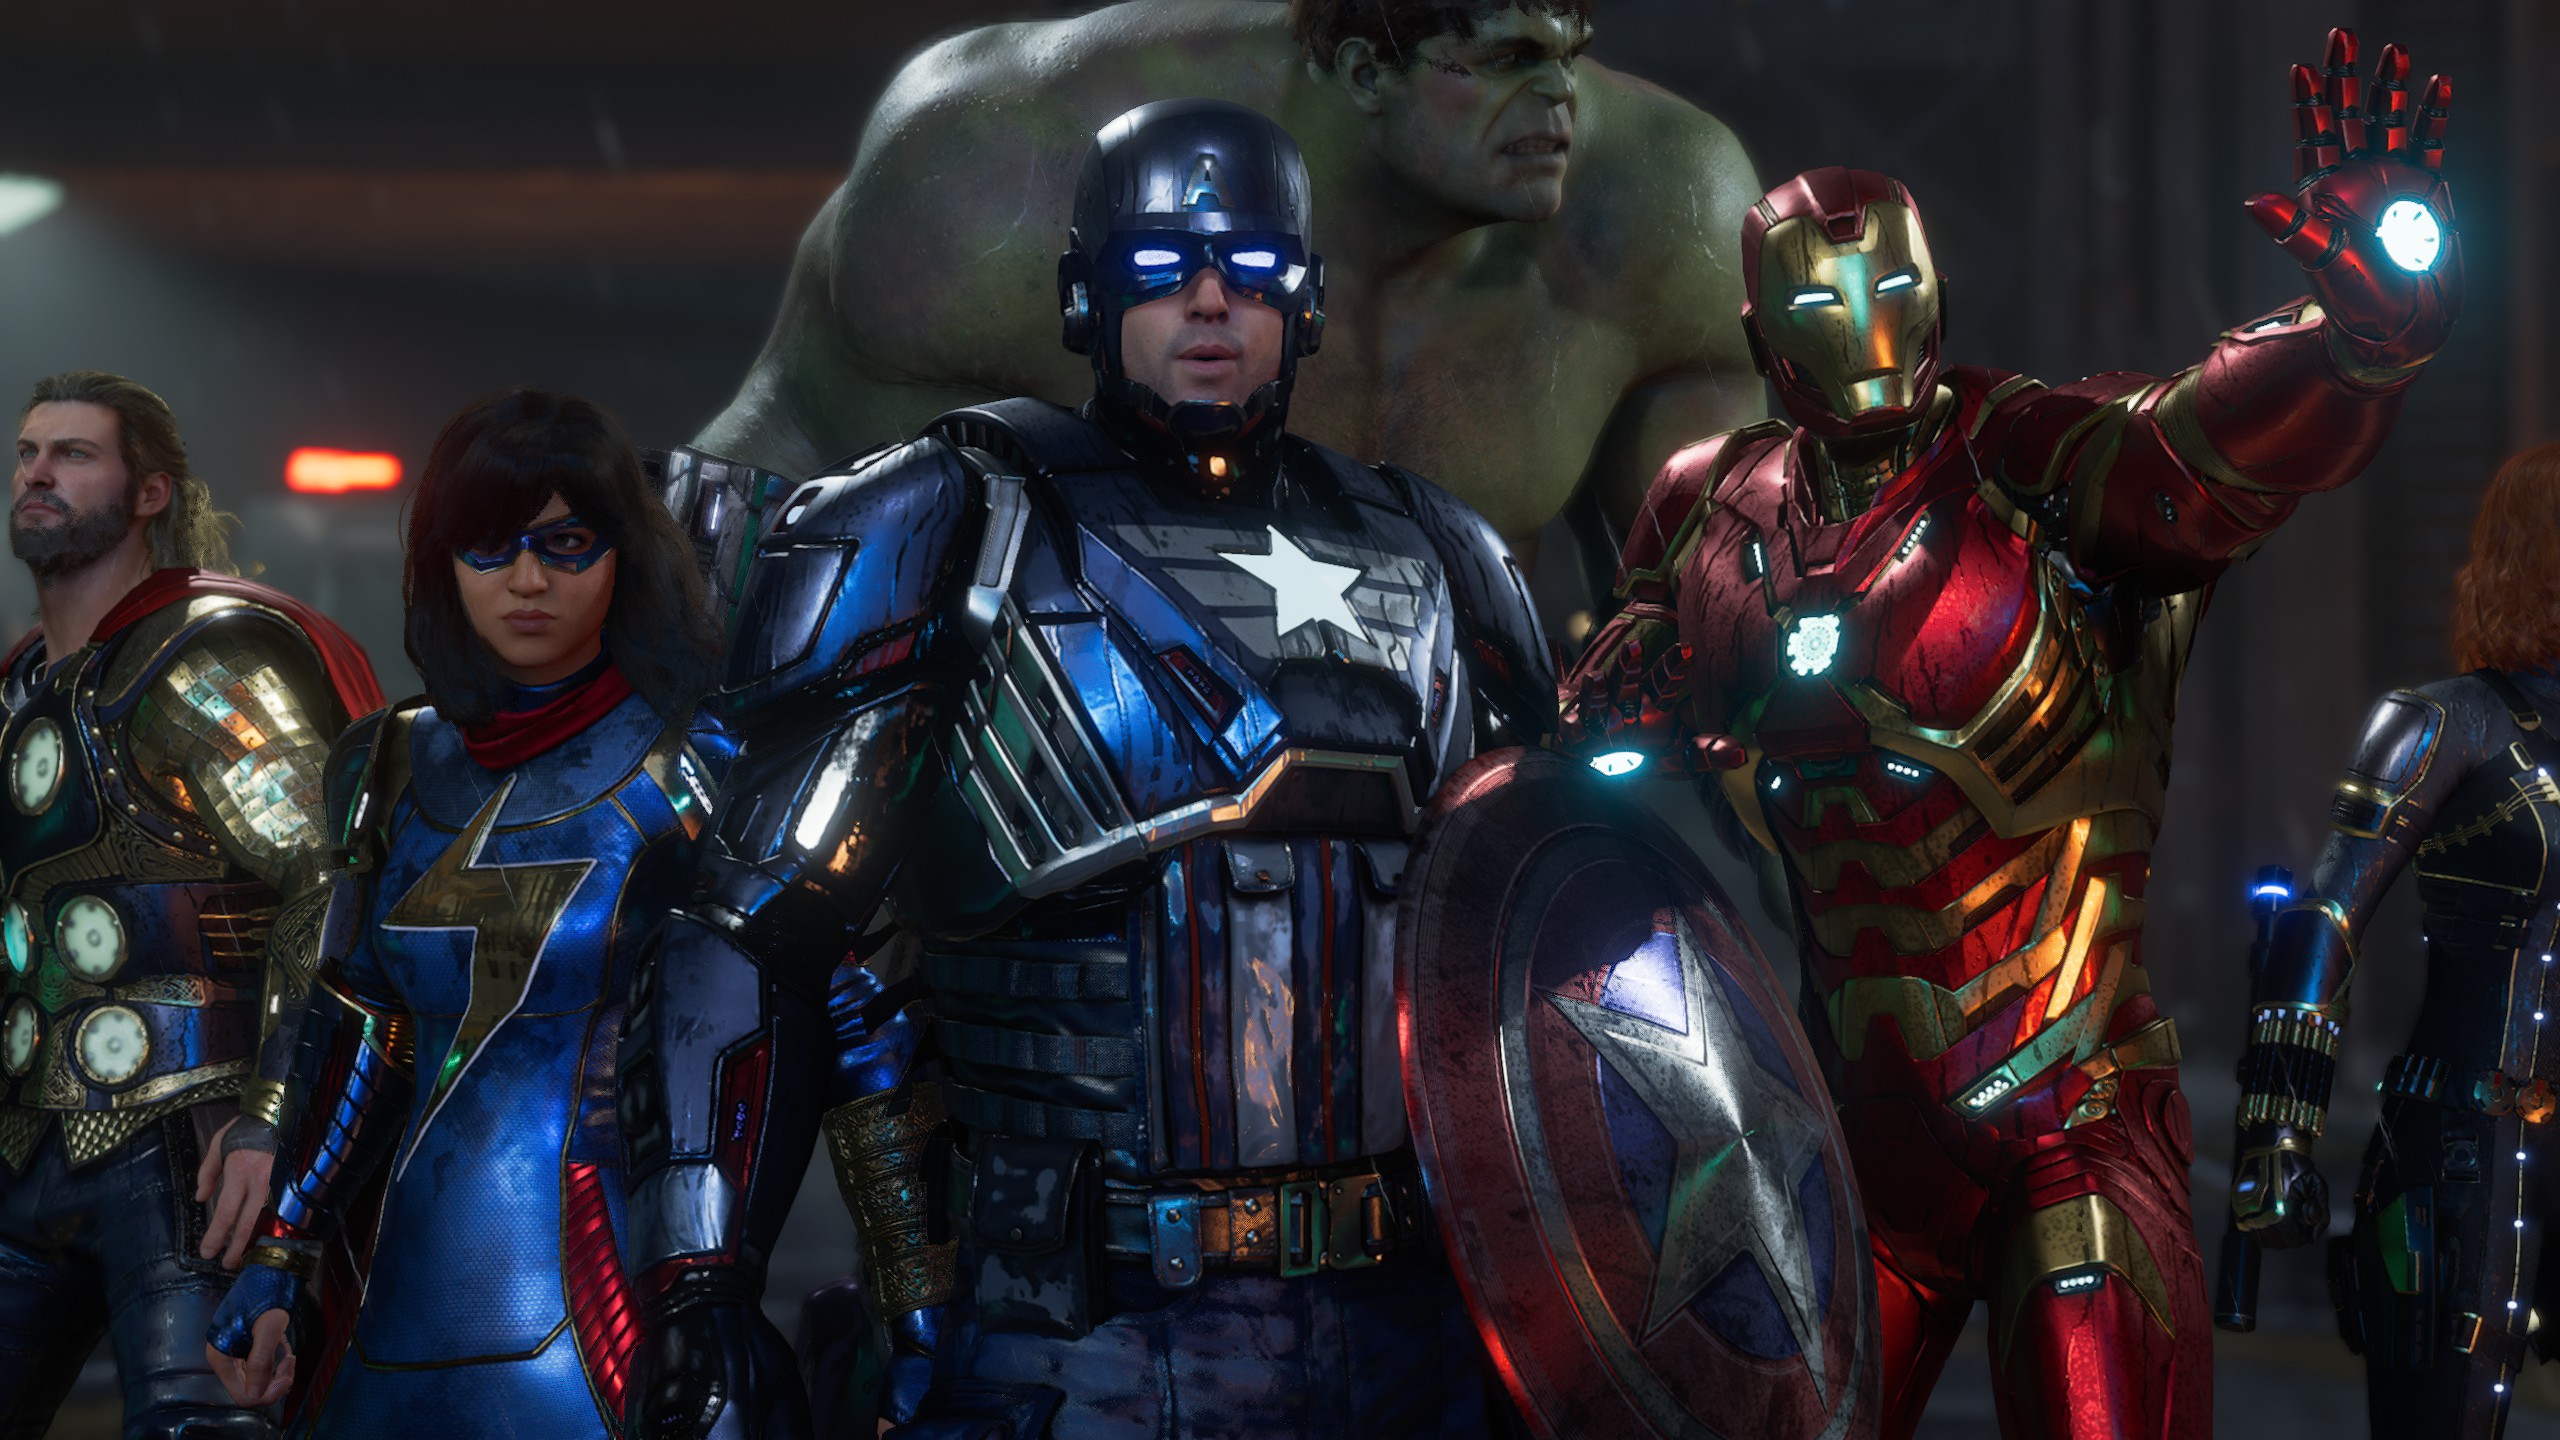  Marvel's Avengers drops paid XP boosters, apologizes for not listening to fans 